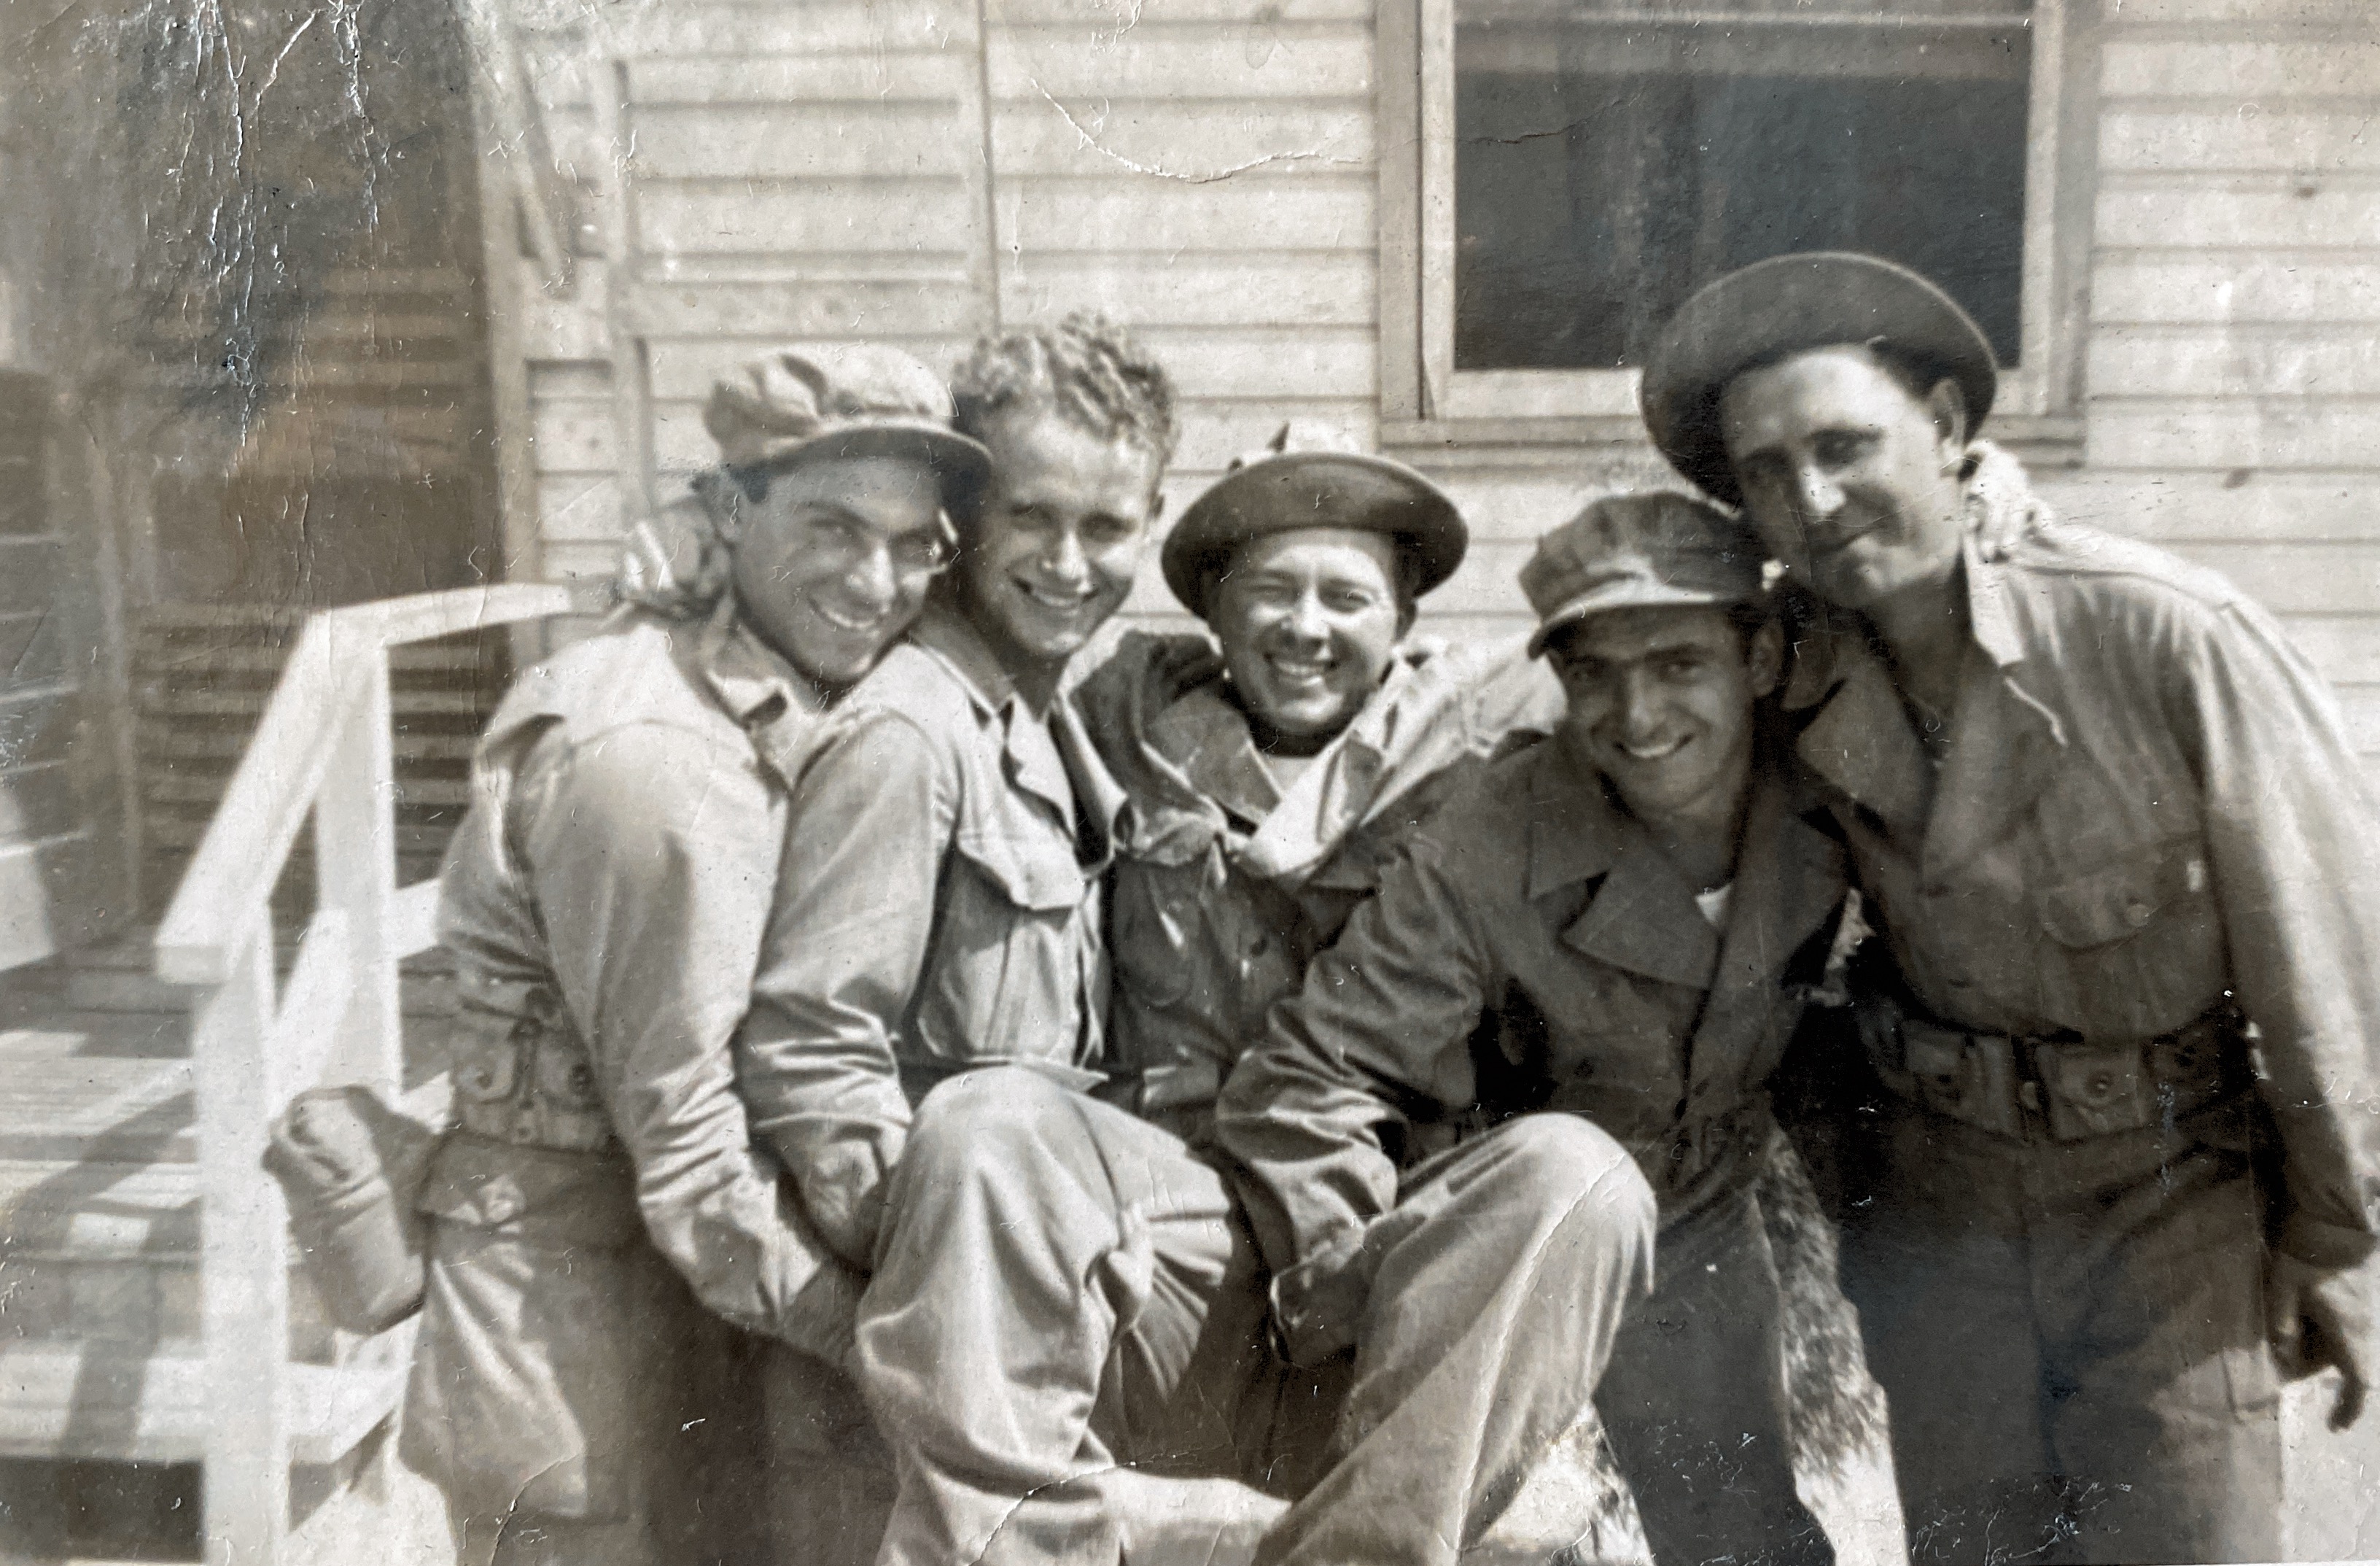 Garry and friends, Camp Lee - 1943